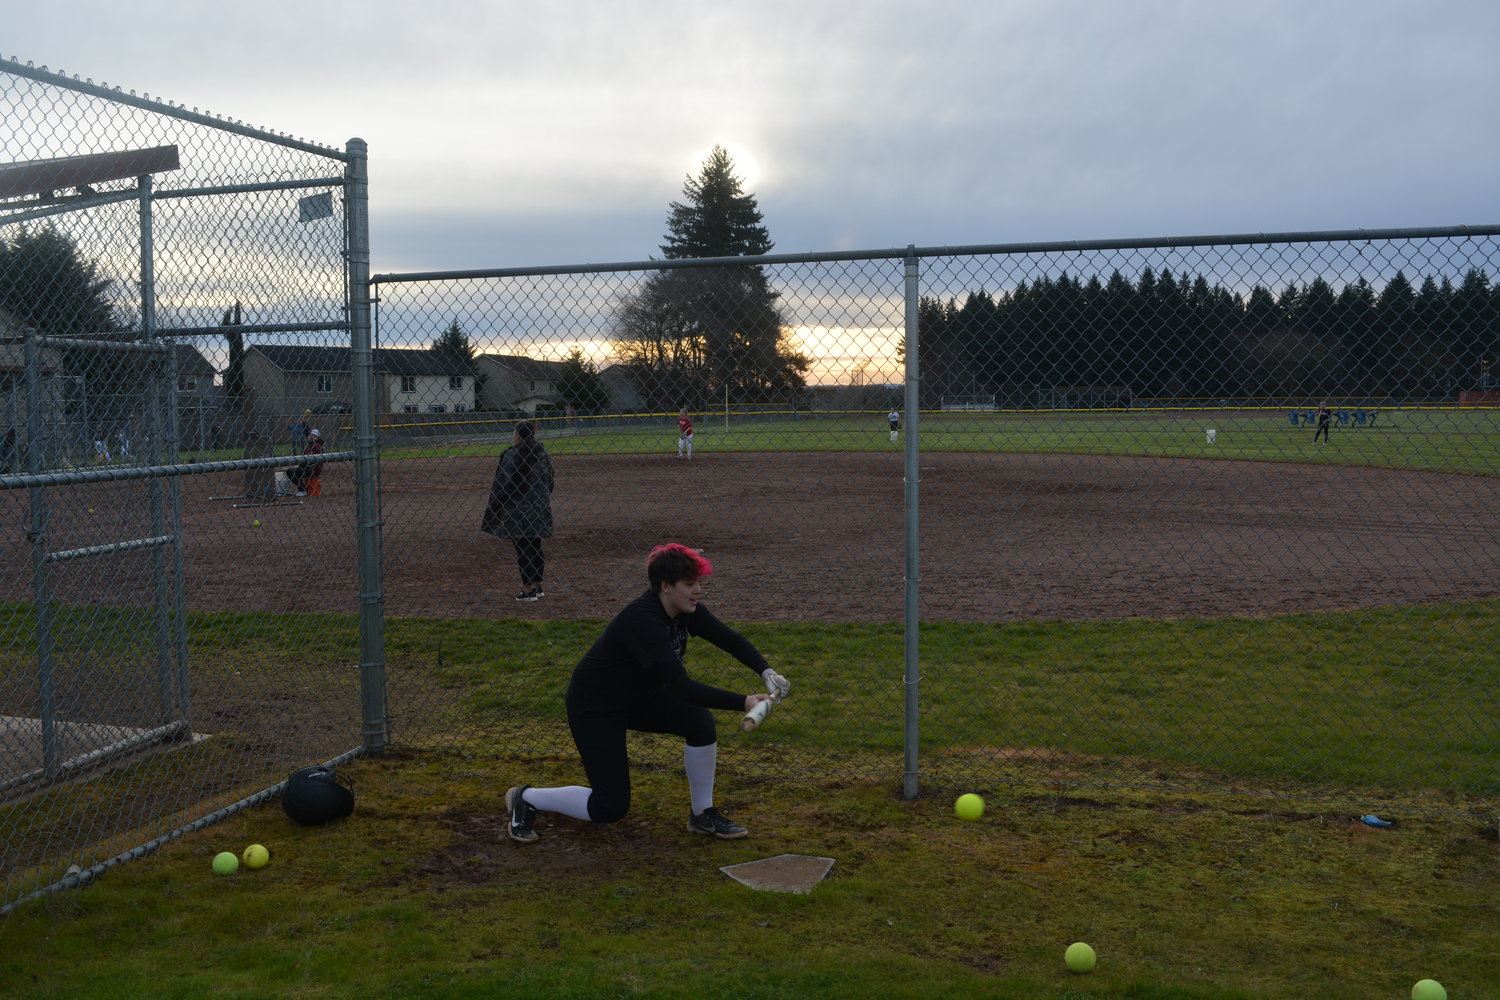 Alysia Fraly practices her bunting skills at Prairie High School on Thursday, March 10.